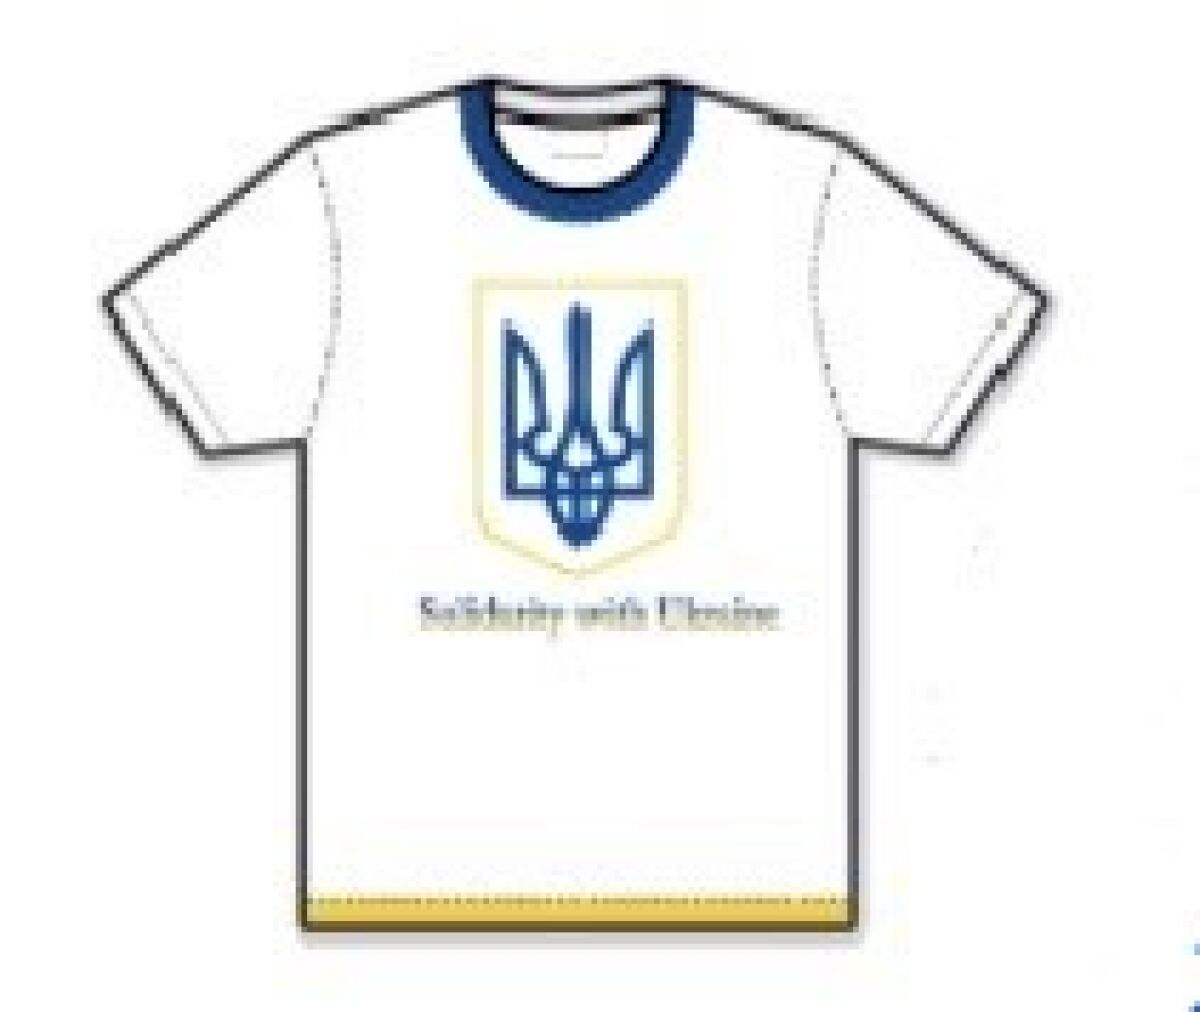 One of the T-shirt designs to be sold by Ryan Garcia, owner of G3 Printing in National City, to aid the Ukrainian military.